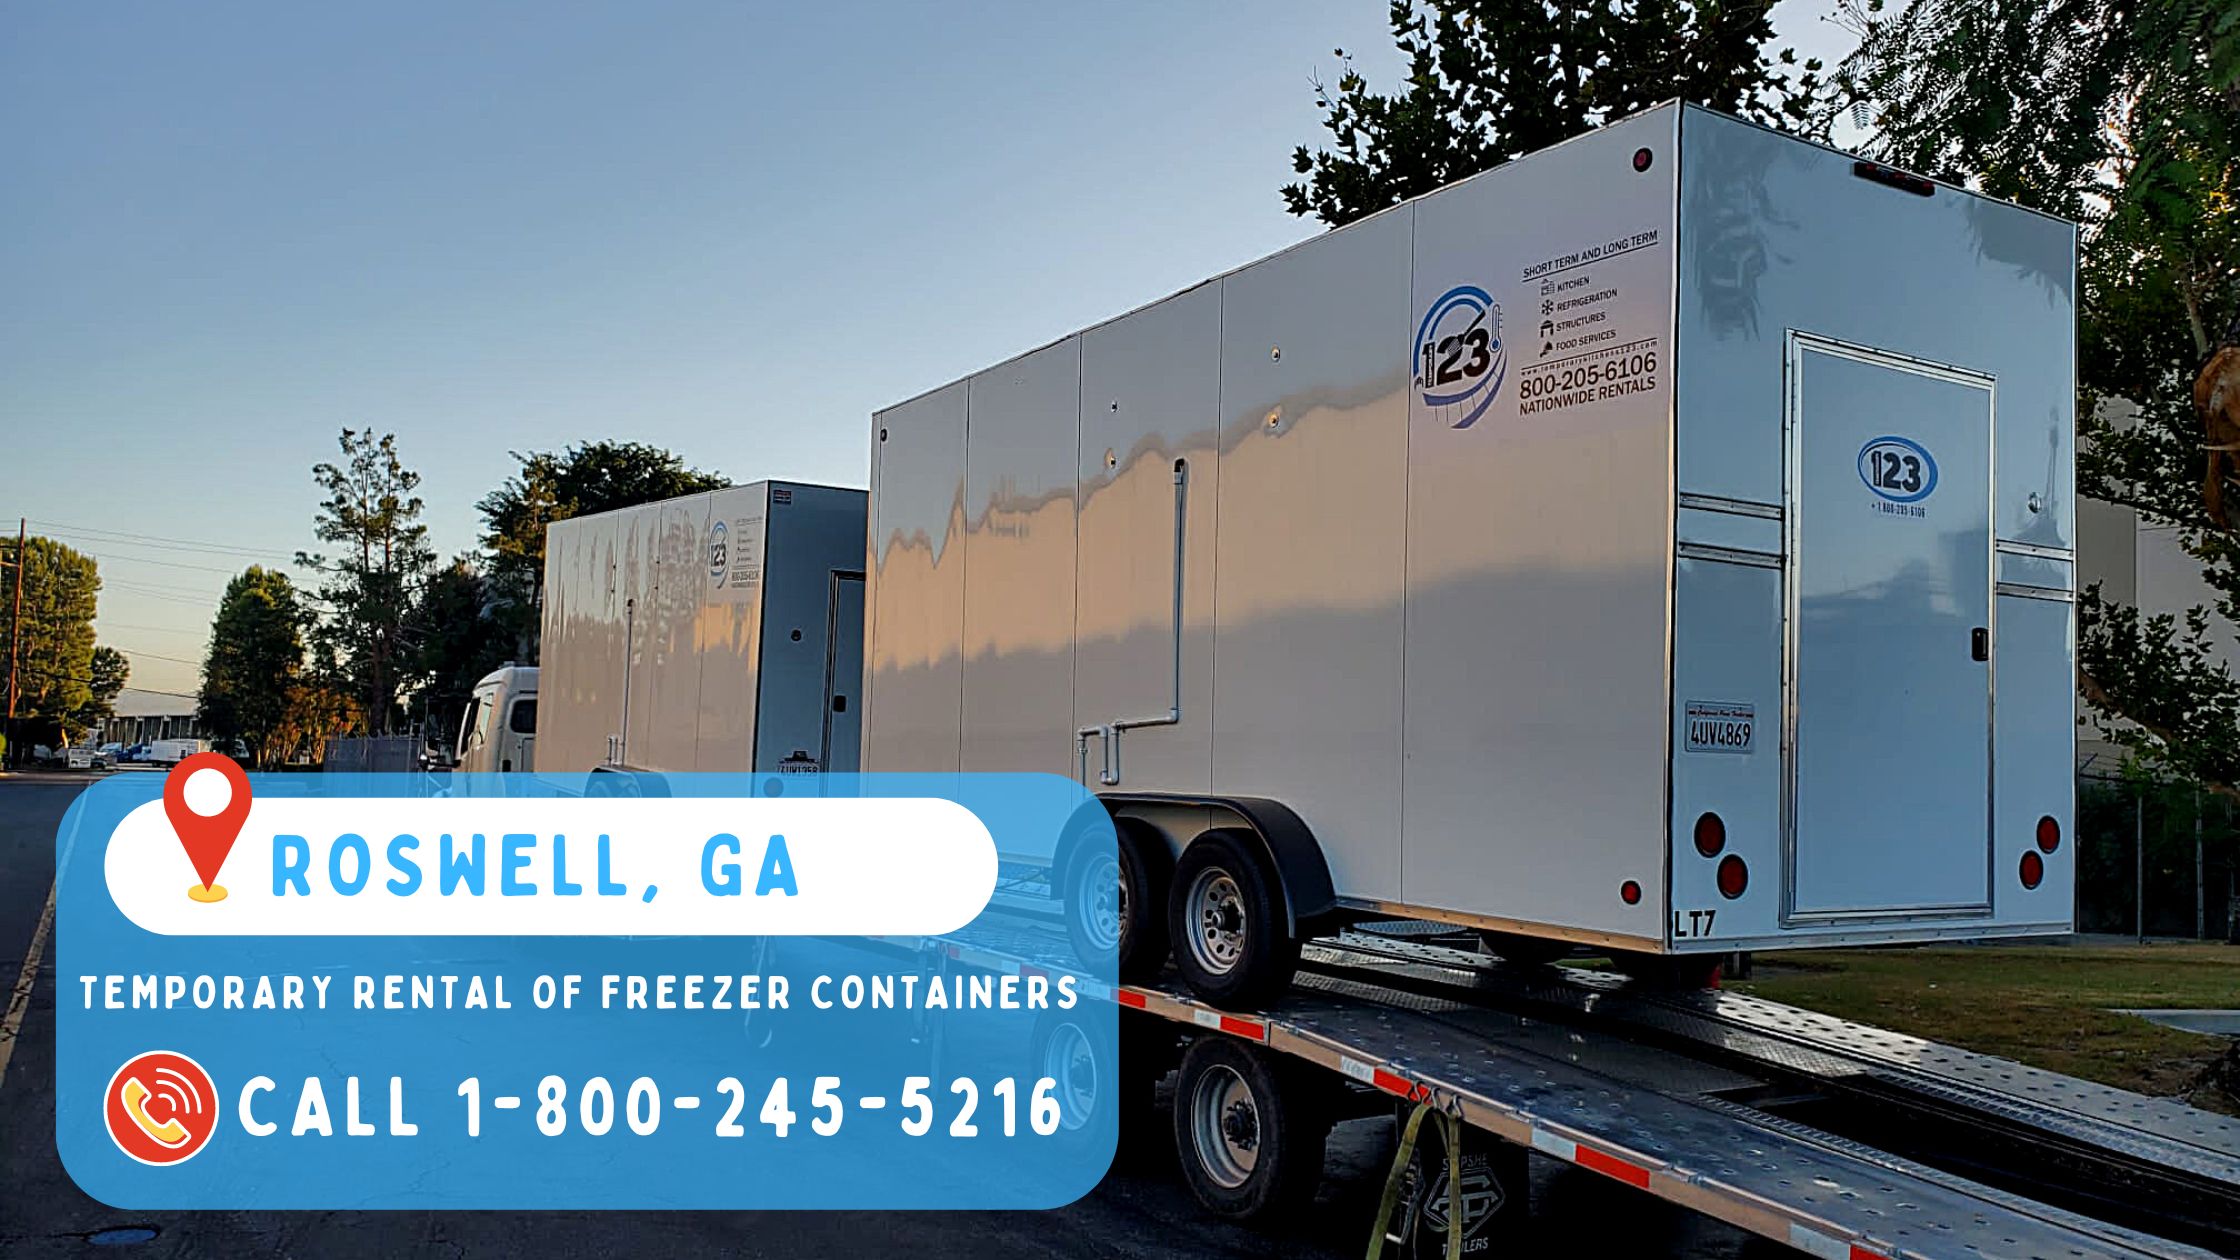 Temporary rental of freezer containers in Roswell